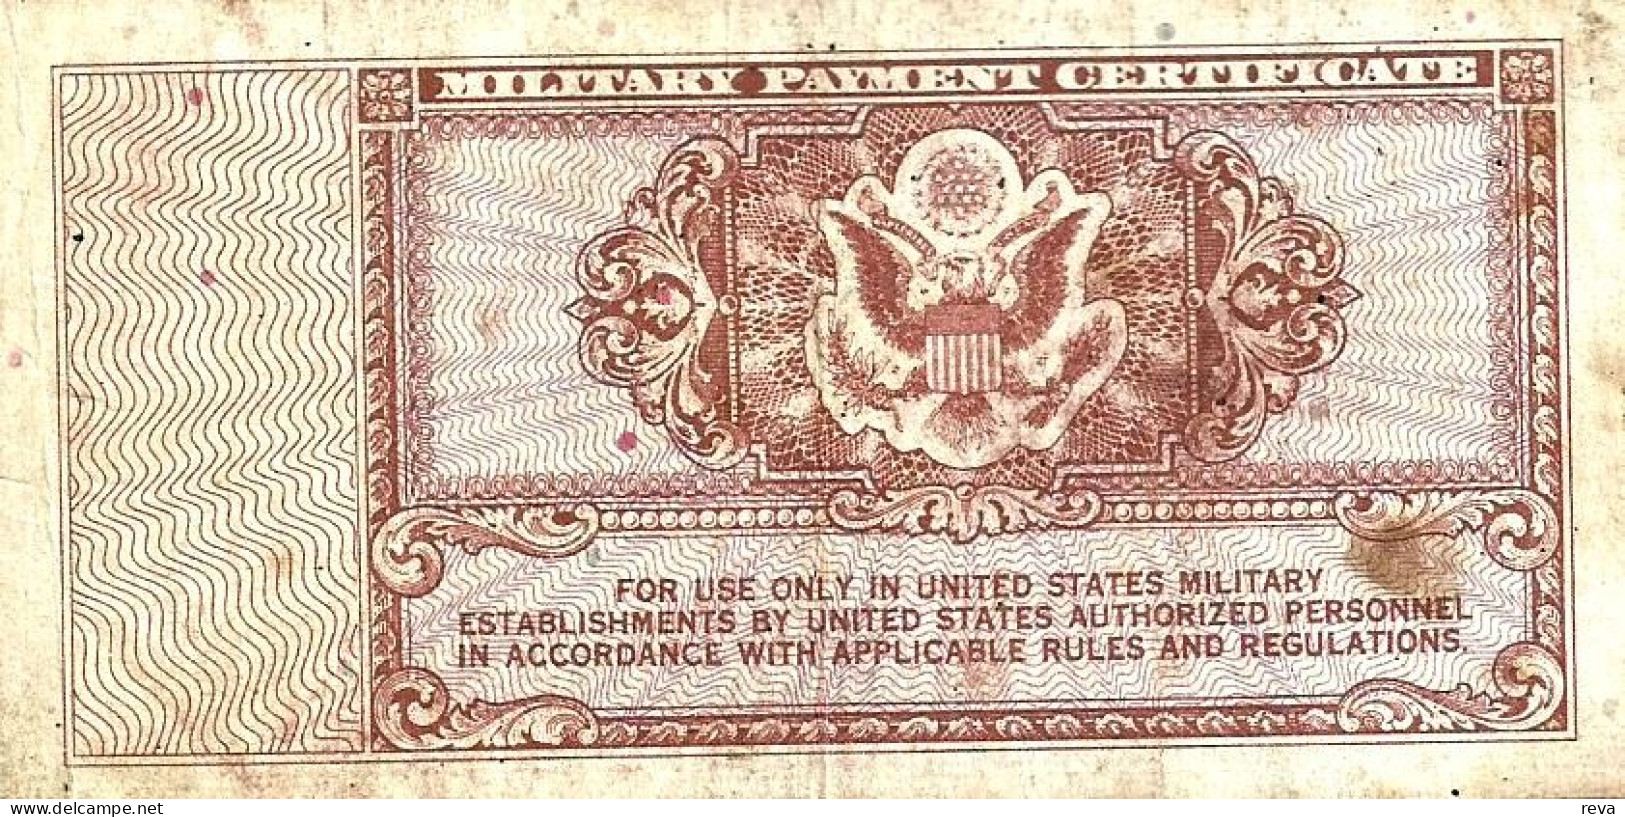 USA UNITED STATES 5 CENTS MILITARY CERTIFICATE BLUE MOTIF SERIES 472 VF ND(1948-51) PM? READ DESCRIPTION CAREFULLY !! - 1948-1951 - Series 472